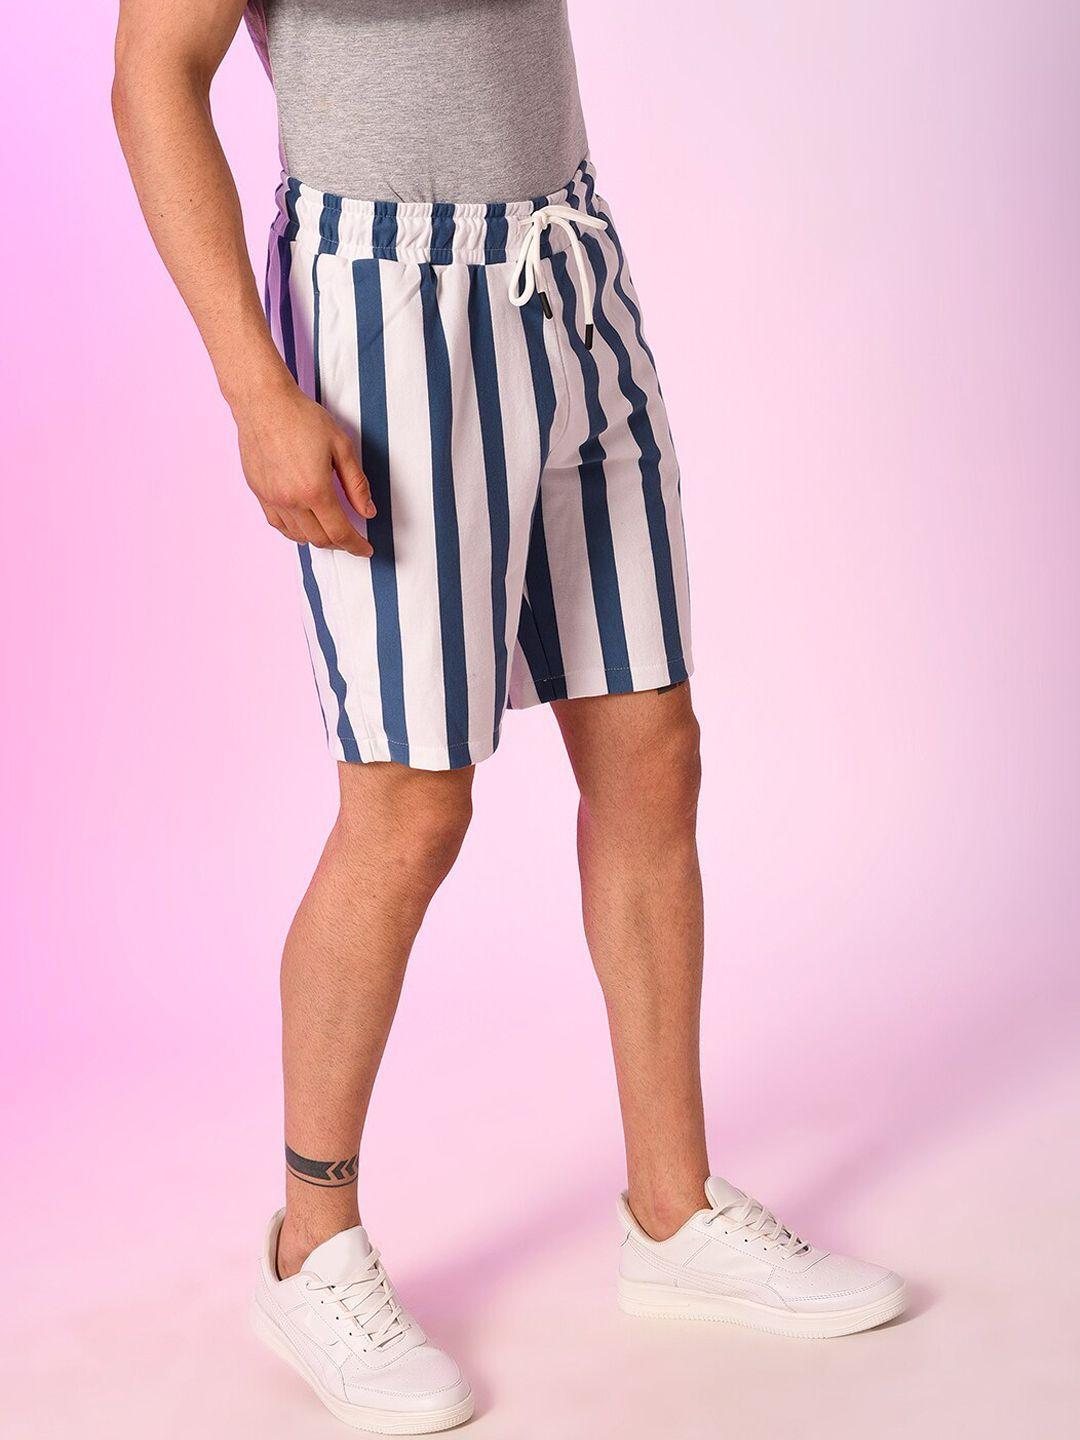 campus sutra men white & blue striped outdoor shorts